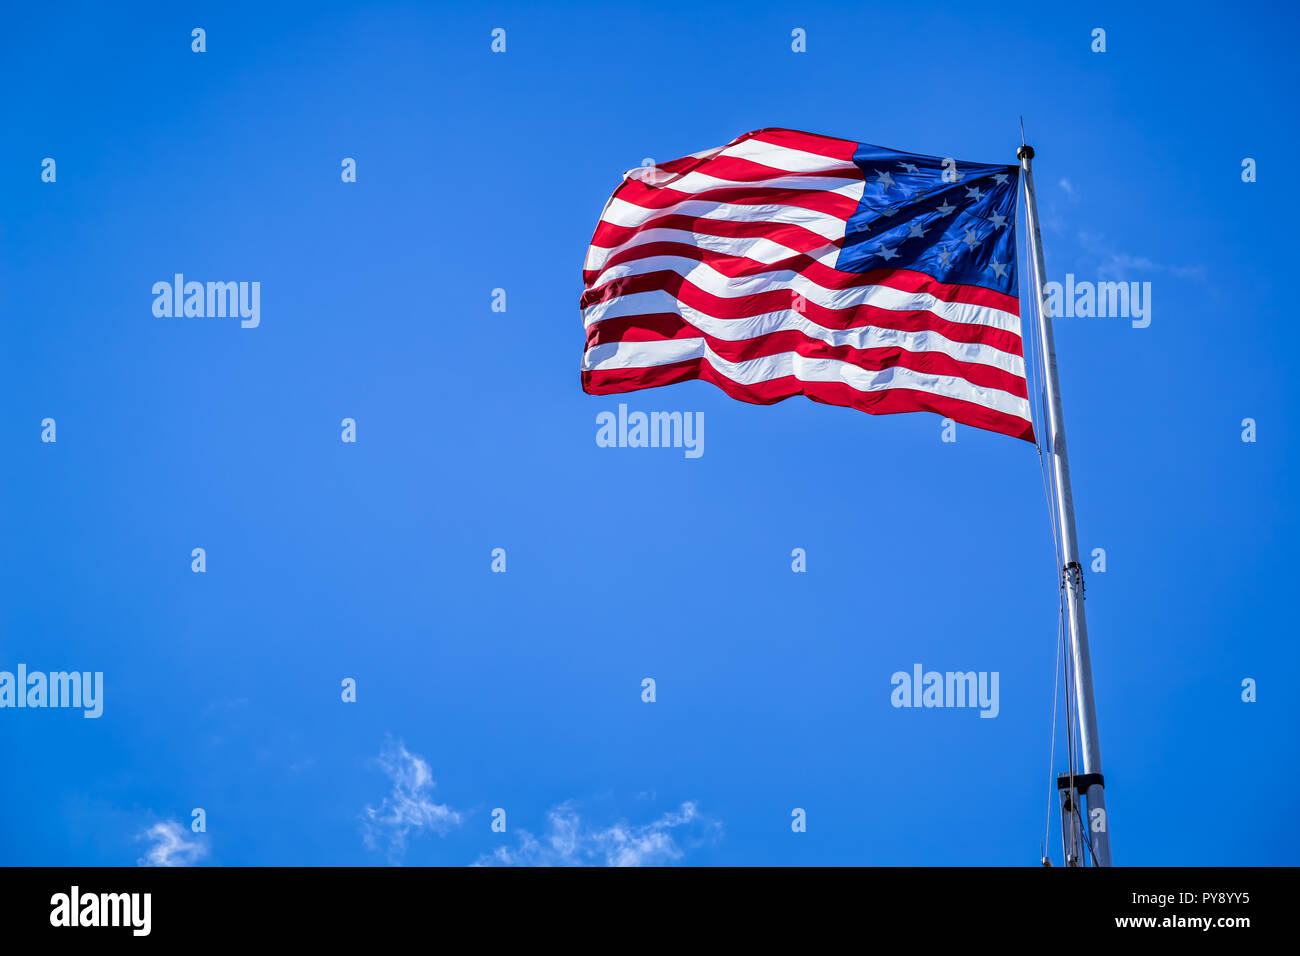 A 15 star American flag flying on a pole on a windy day. Stock Photo